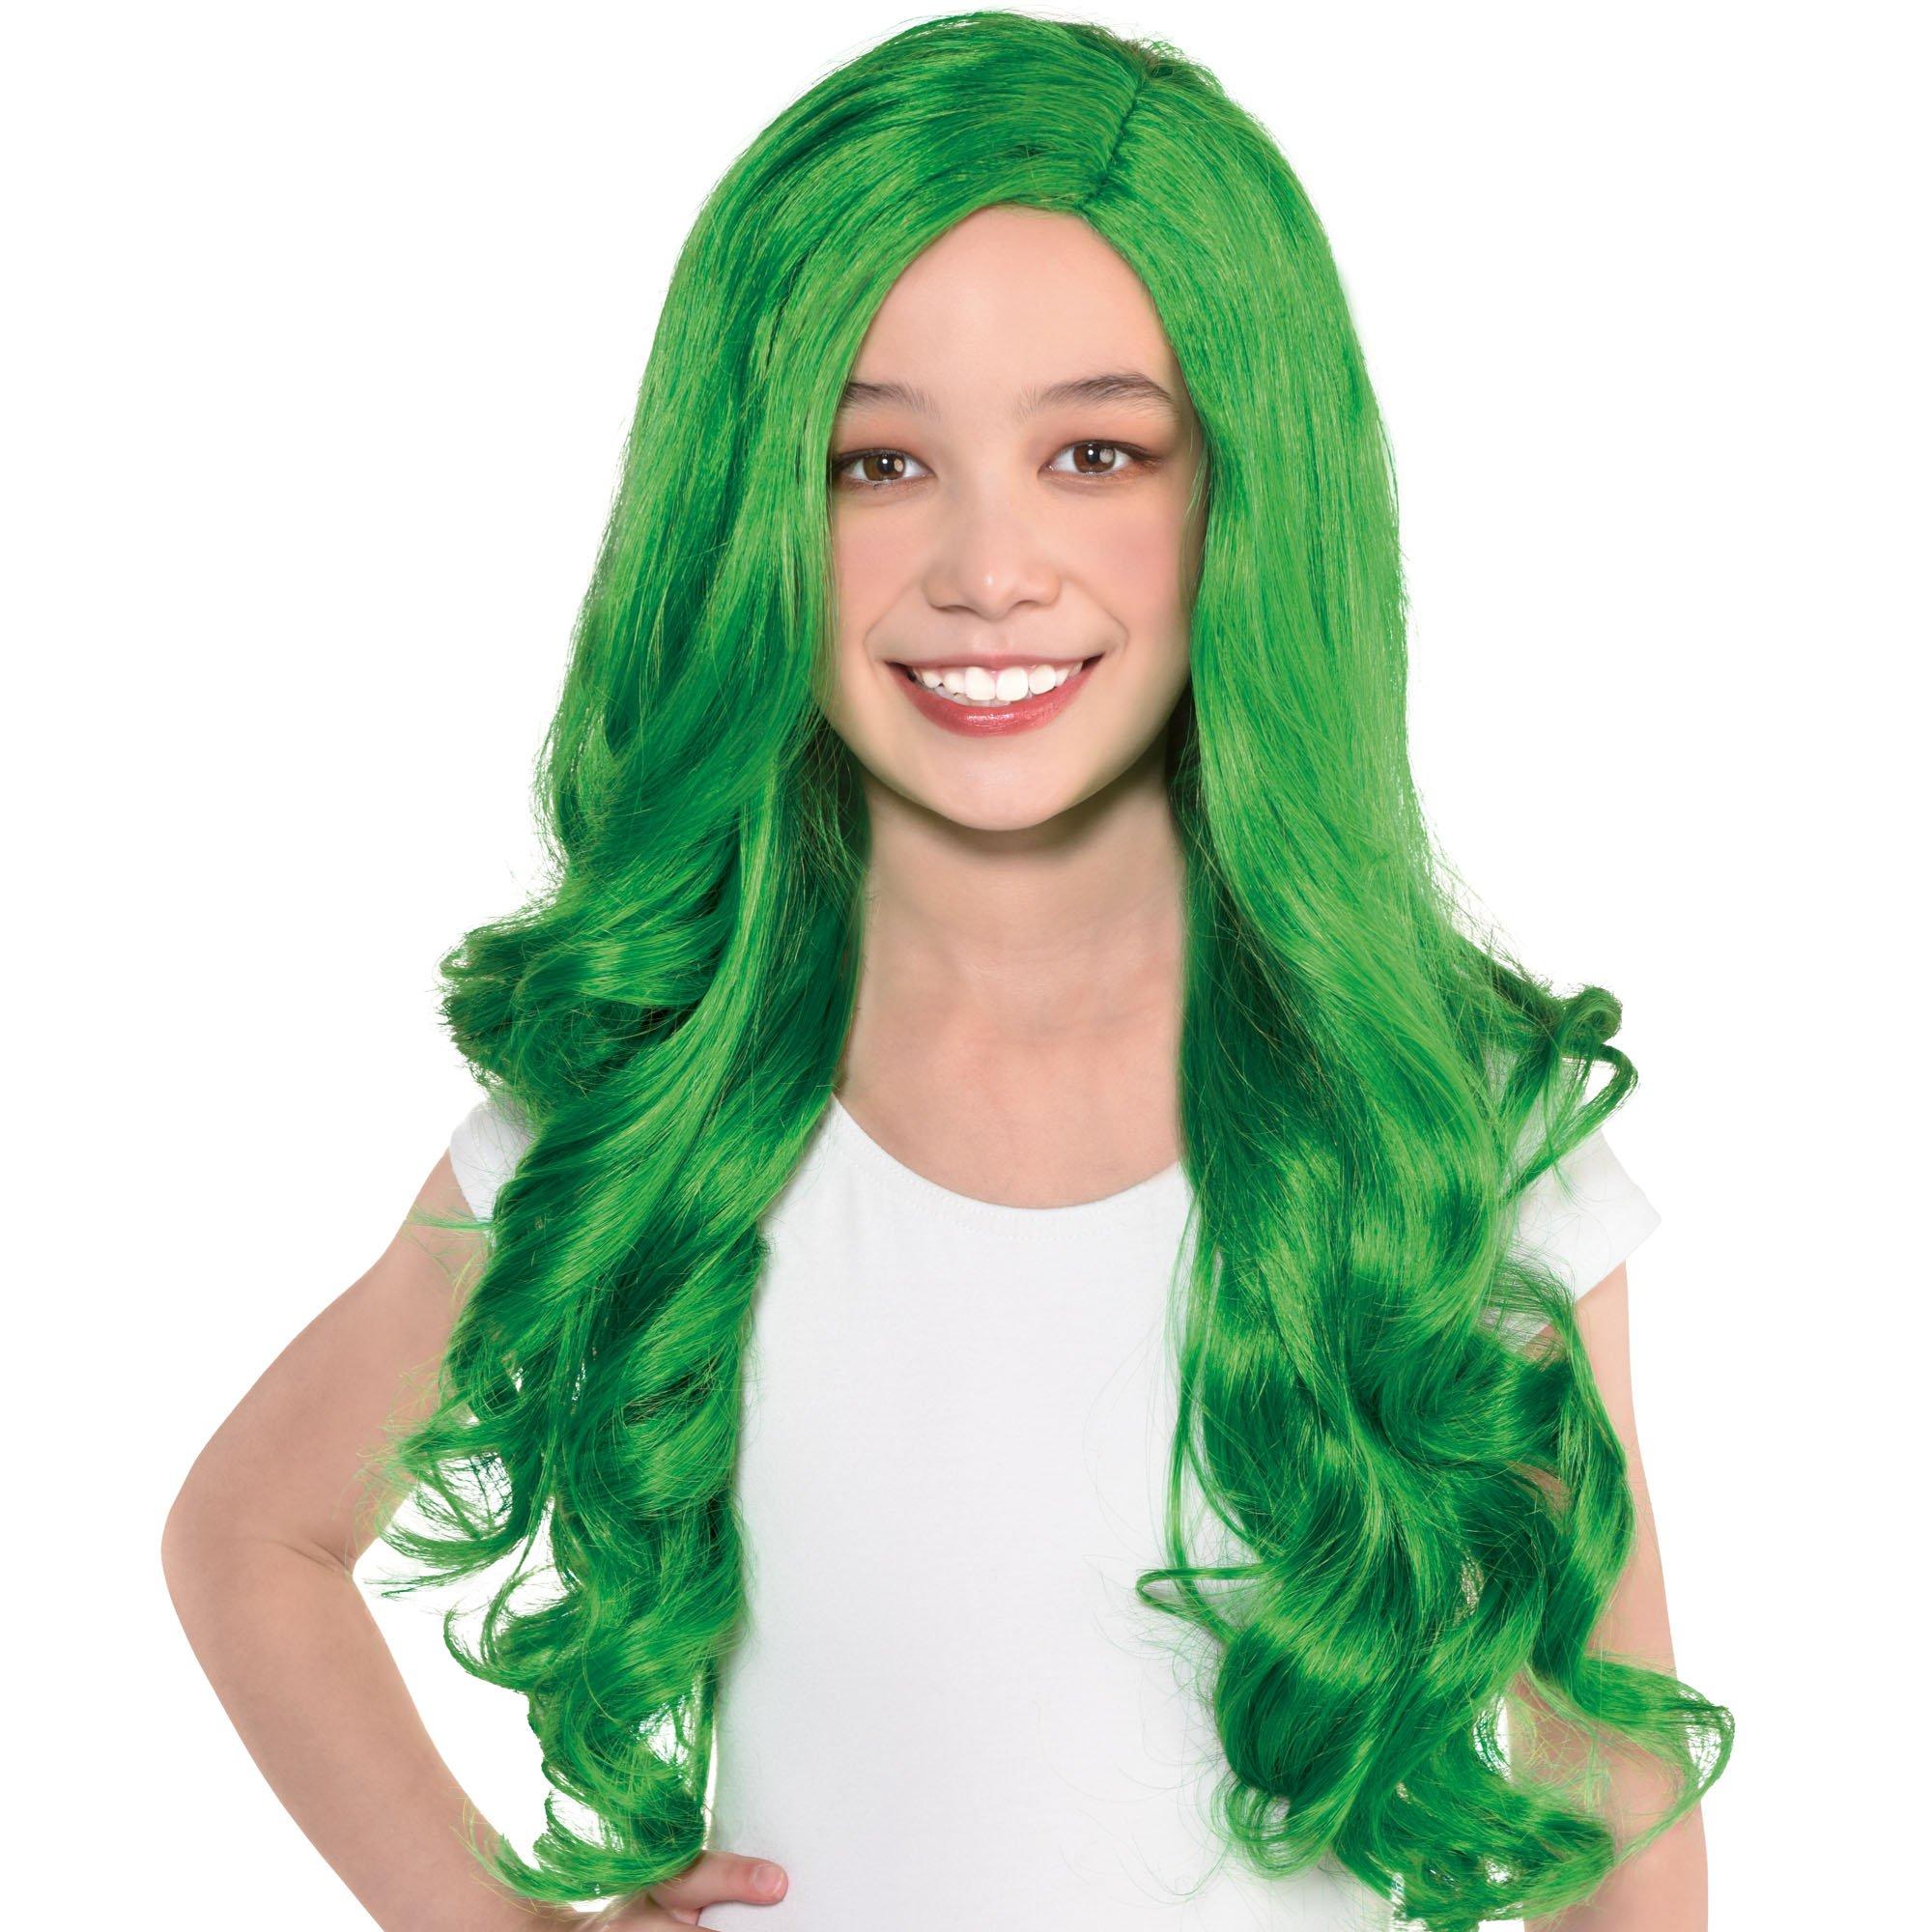 Green Long Glam Wig | Party City